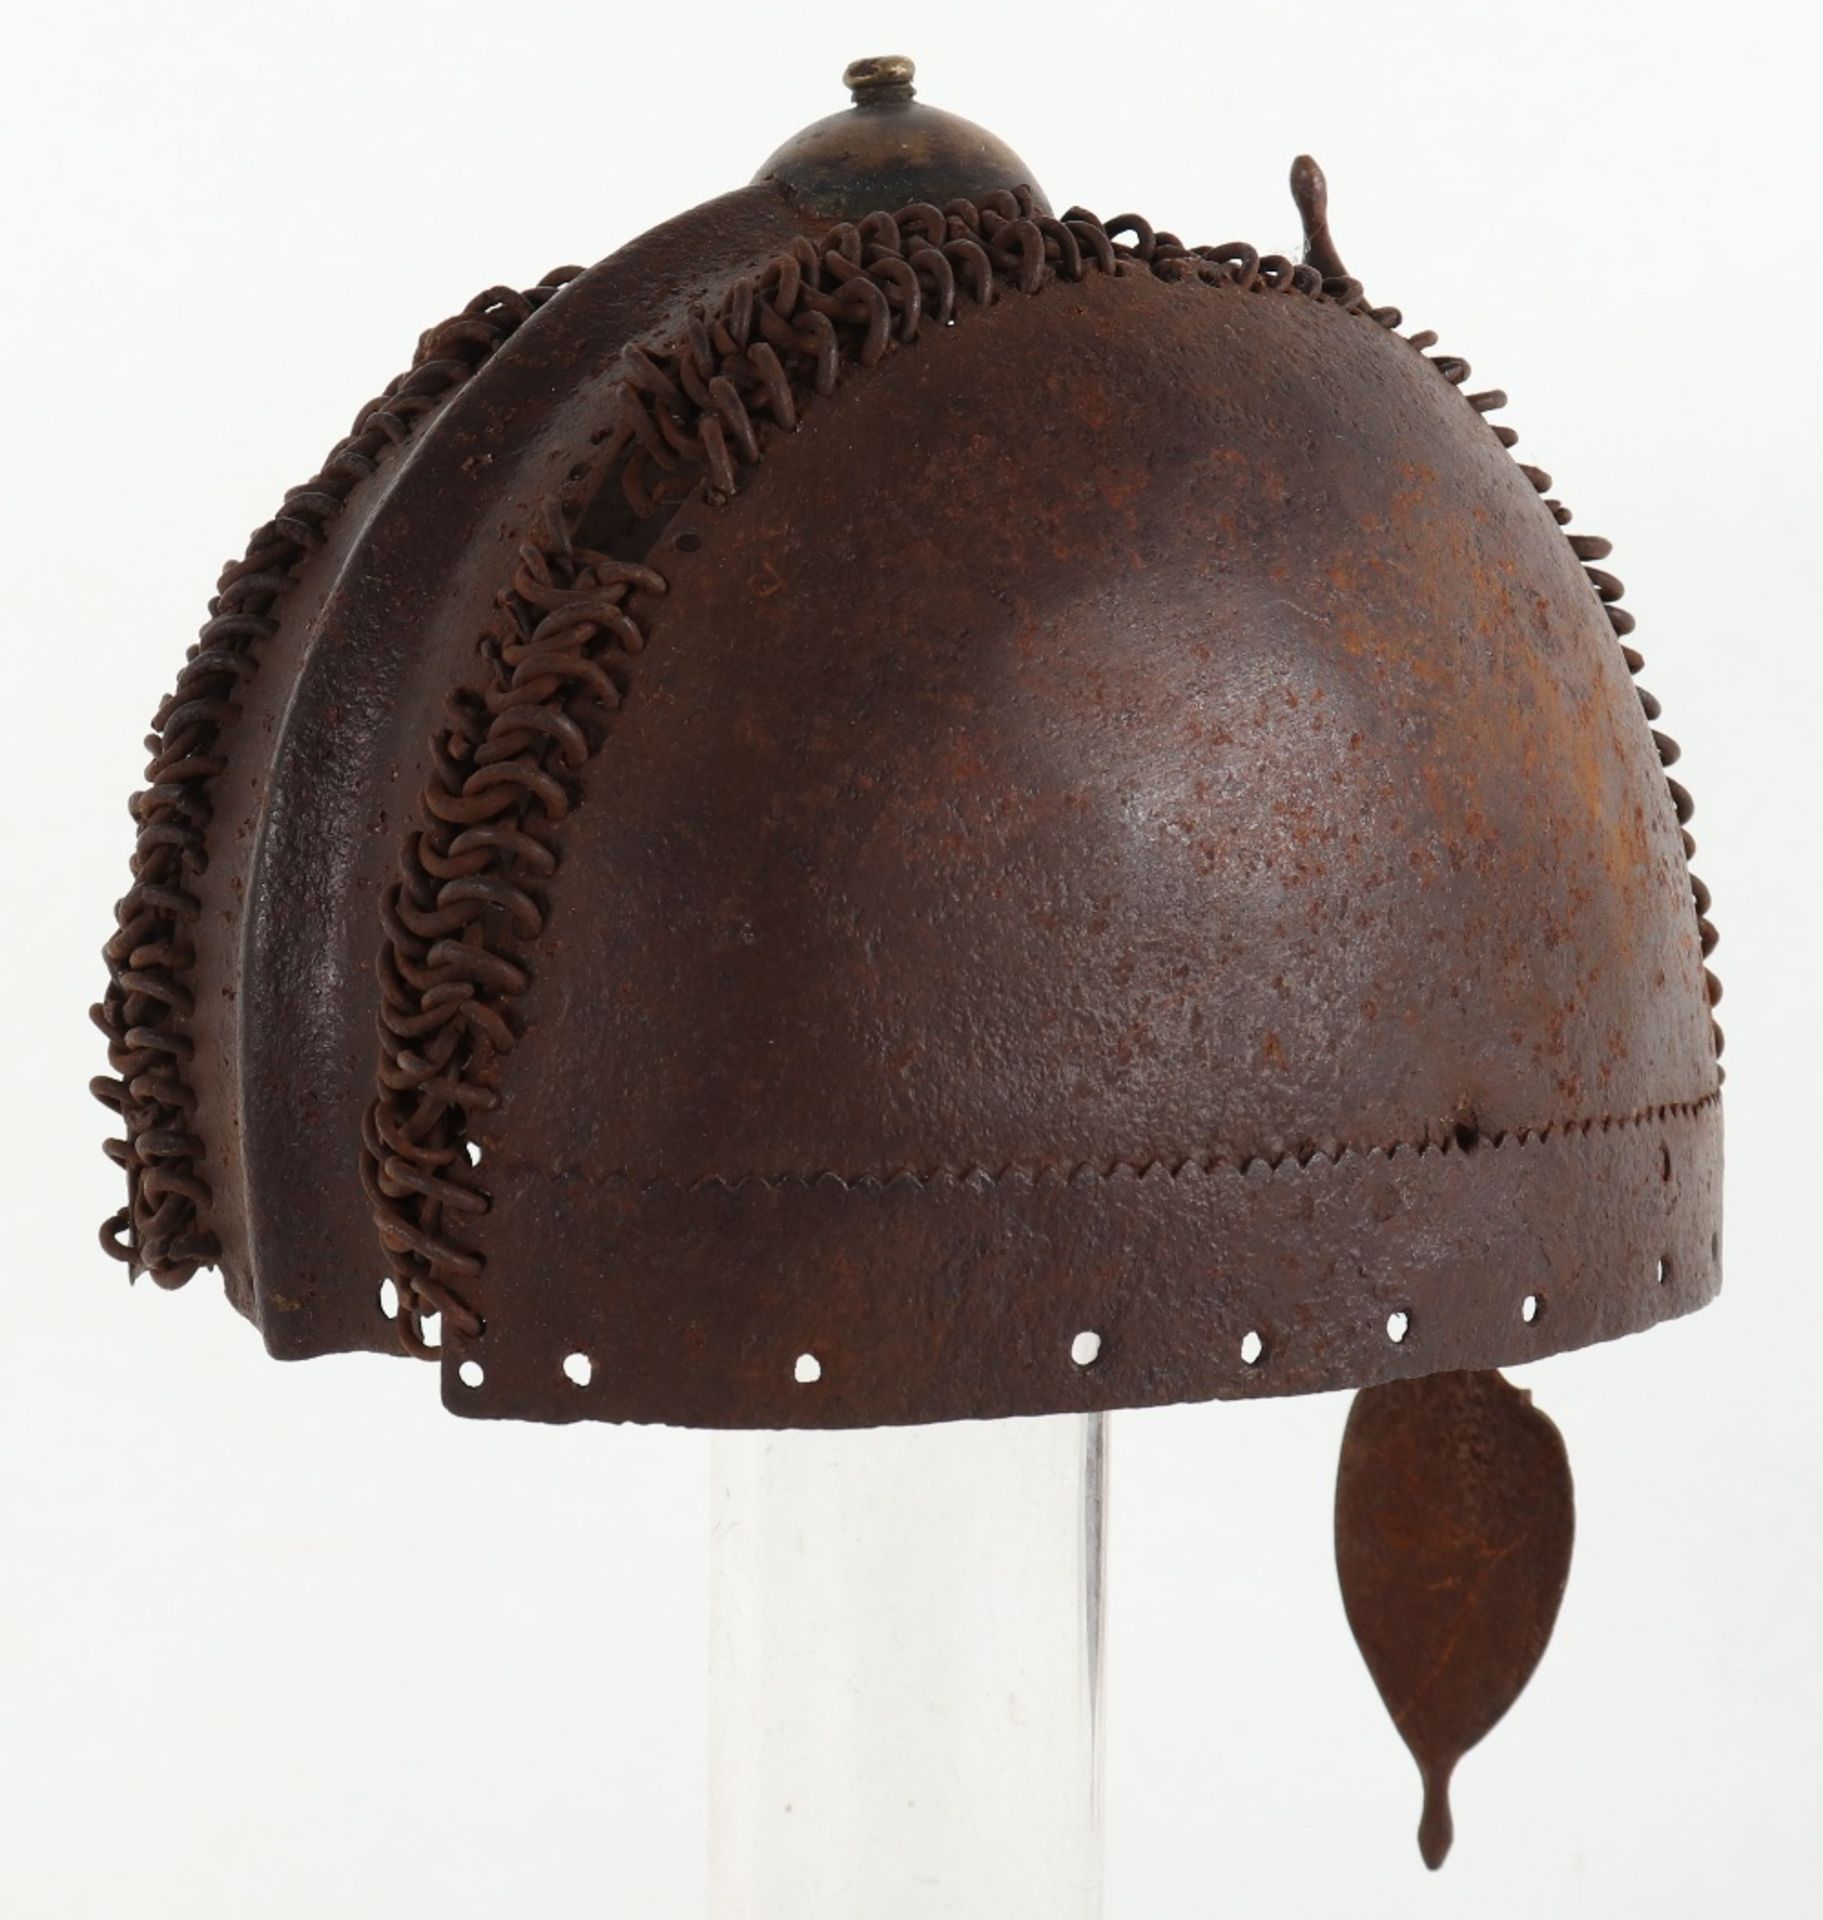 Indian Mail and Plate Helmet, 17th Century - Image 4 of 10